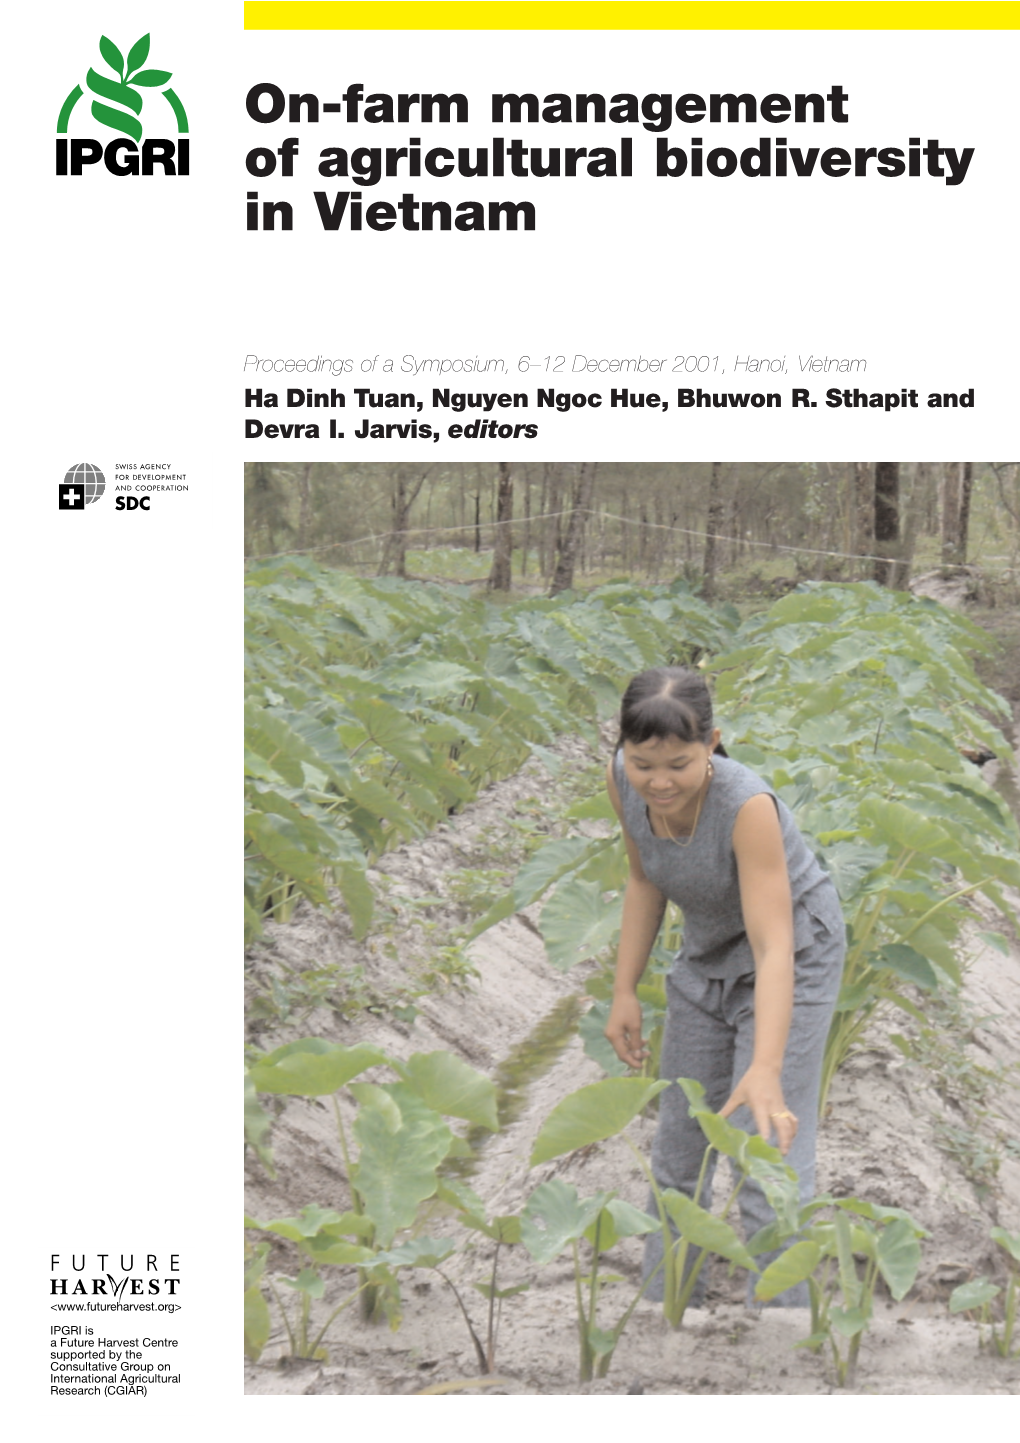 On-Farm Management of Agricultural Biodiversity in Vietnam